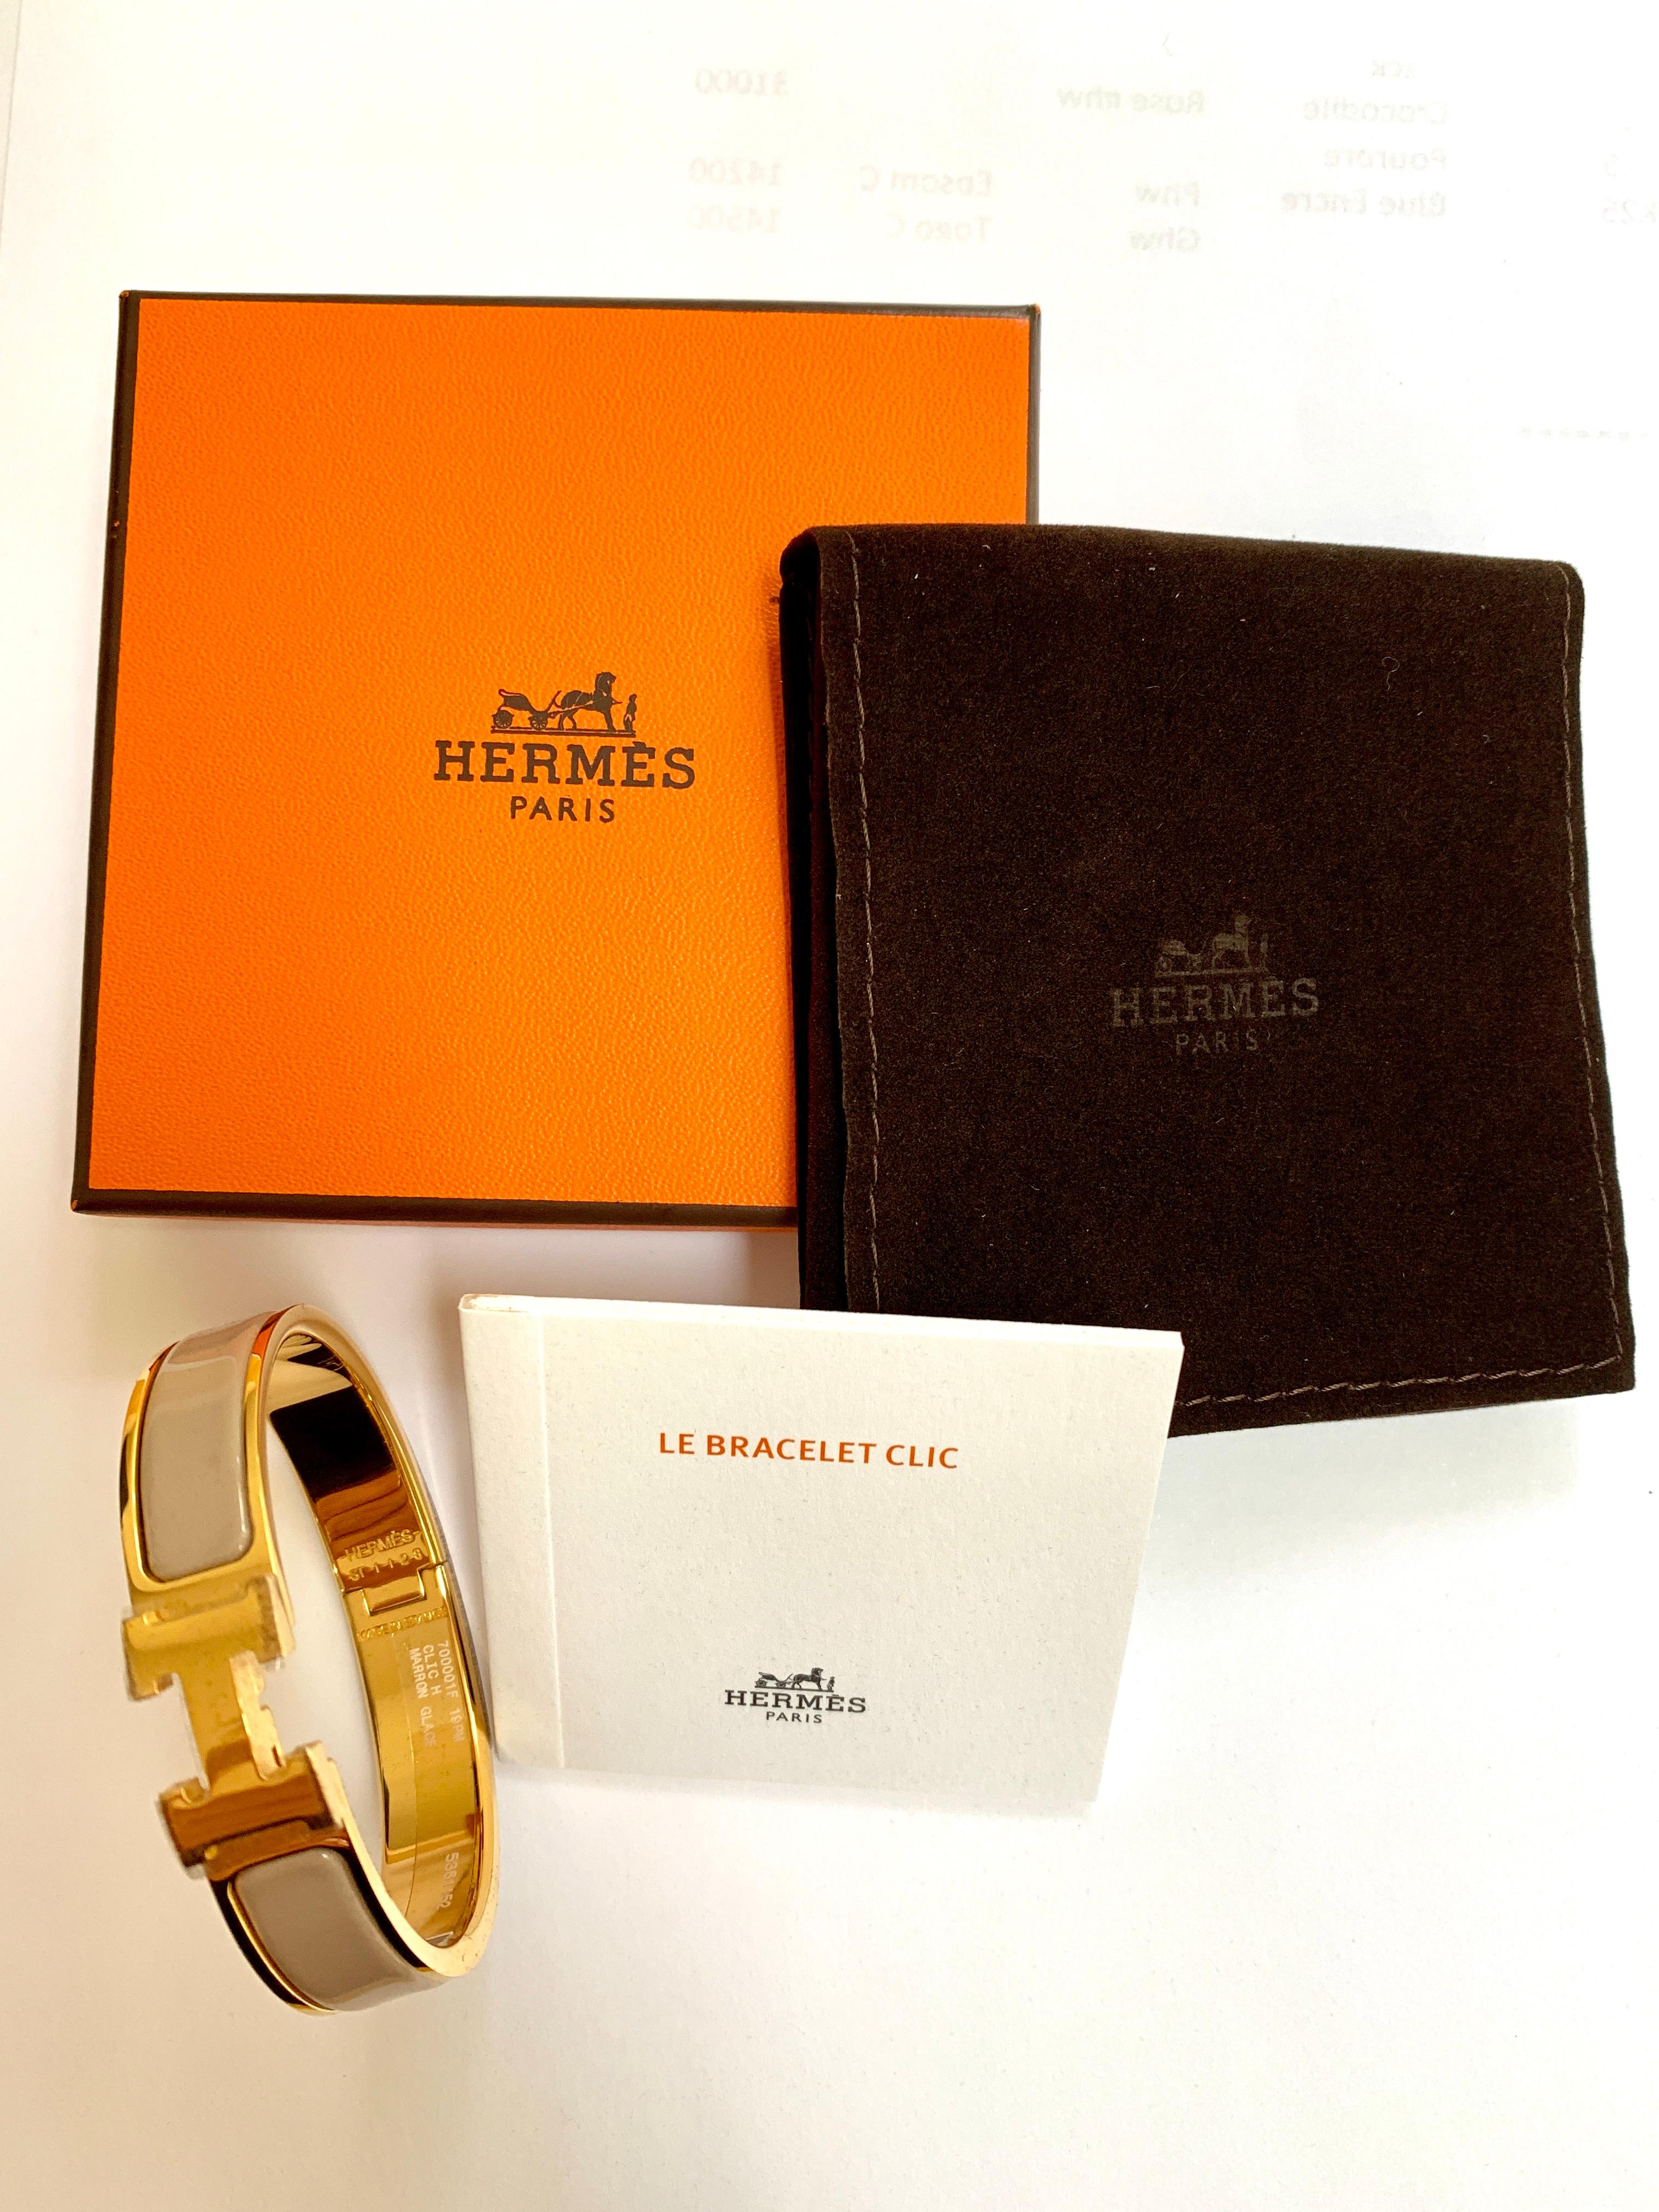 Hermes Clic  H bracelet Gold plate
Enamel Bracelet
H opening
Color: Marron Glace
Size PM
Gold plated
Brand new with plastic

Circumference: 7